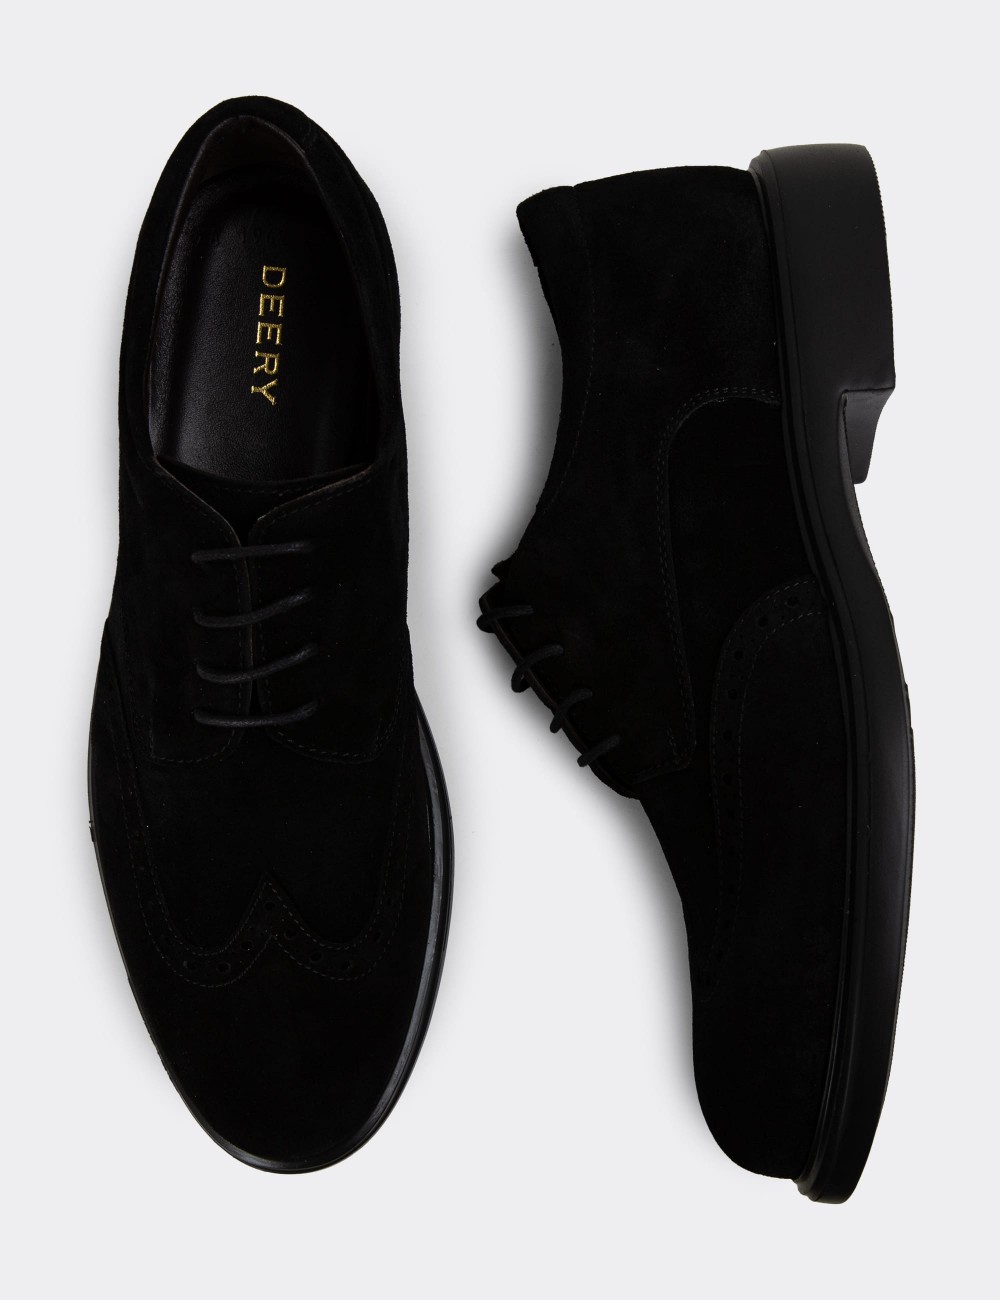 Black Suede Leather Lace-up Shoes - 01942MSYHE04